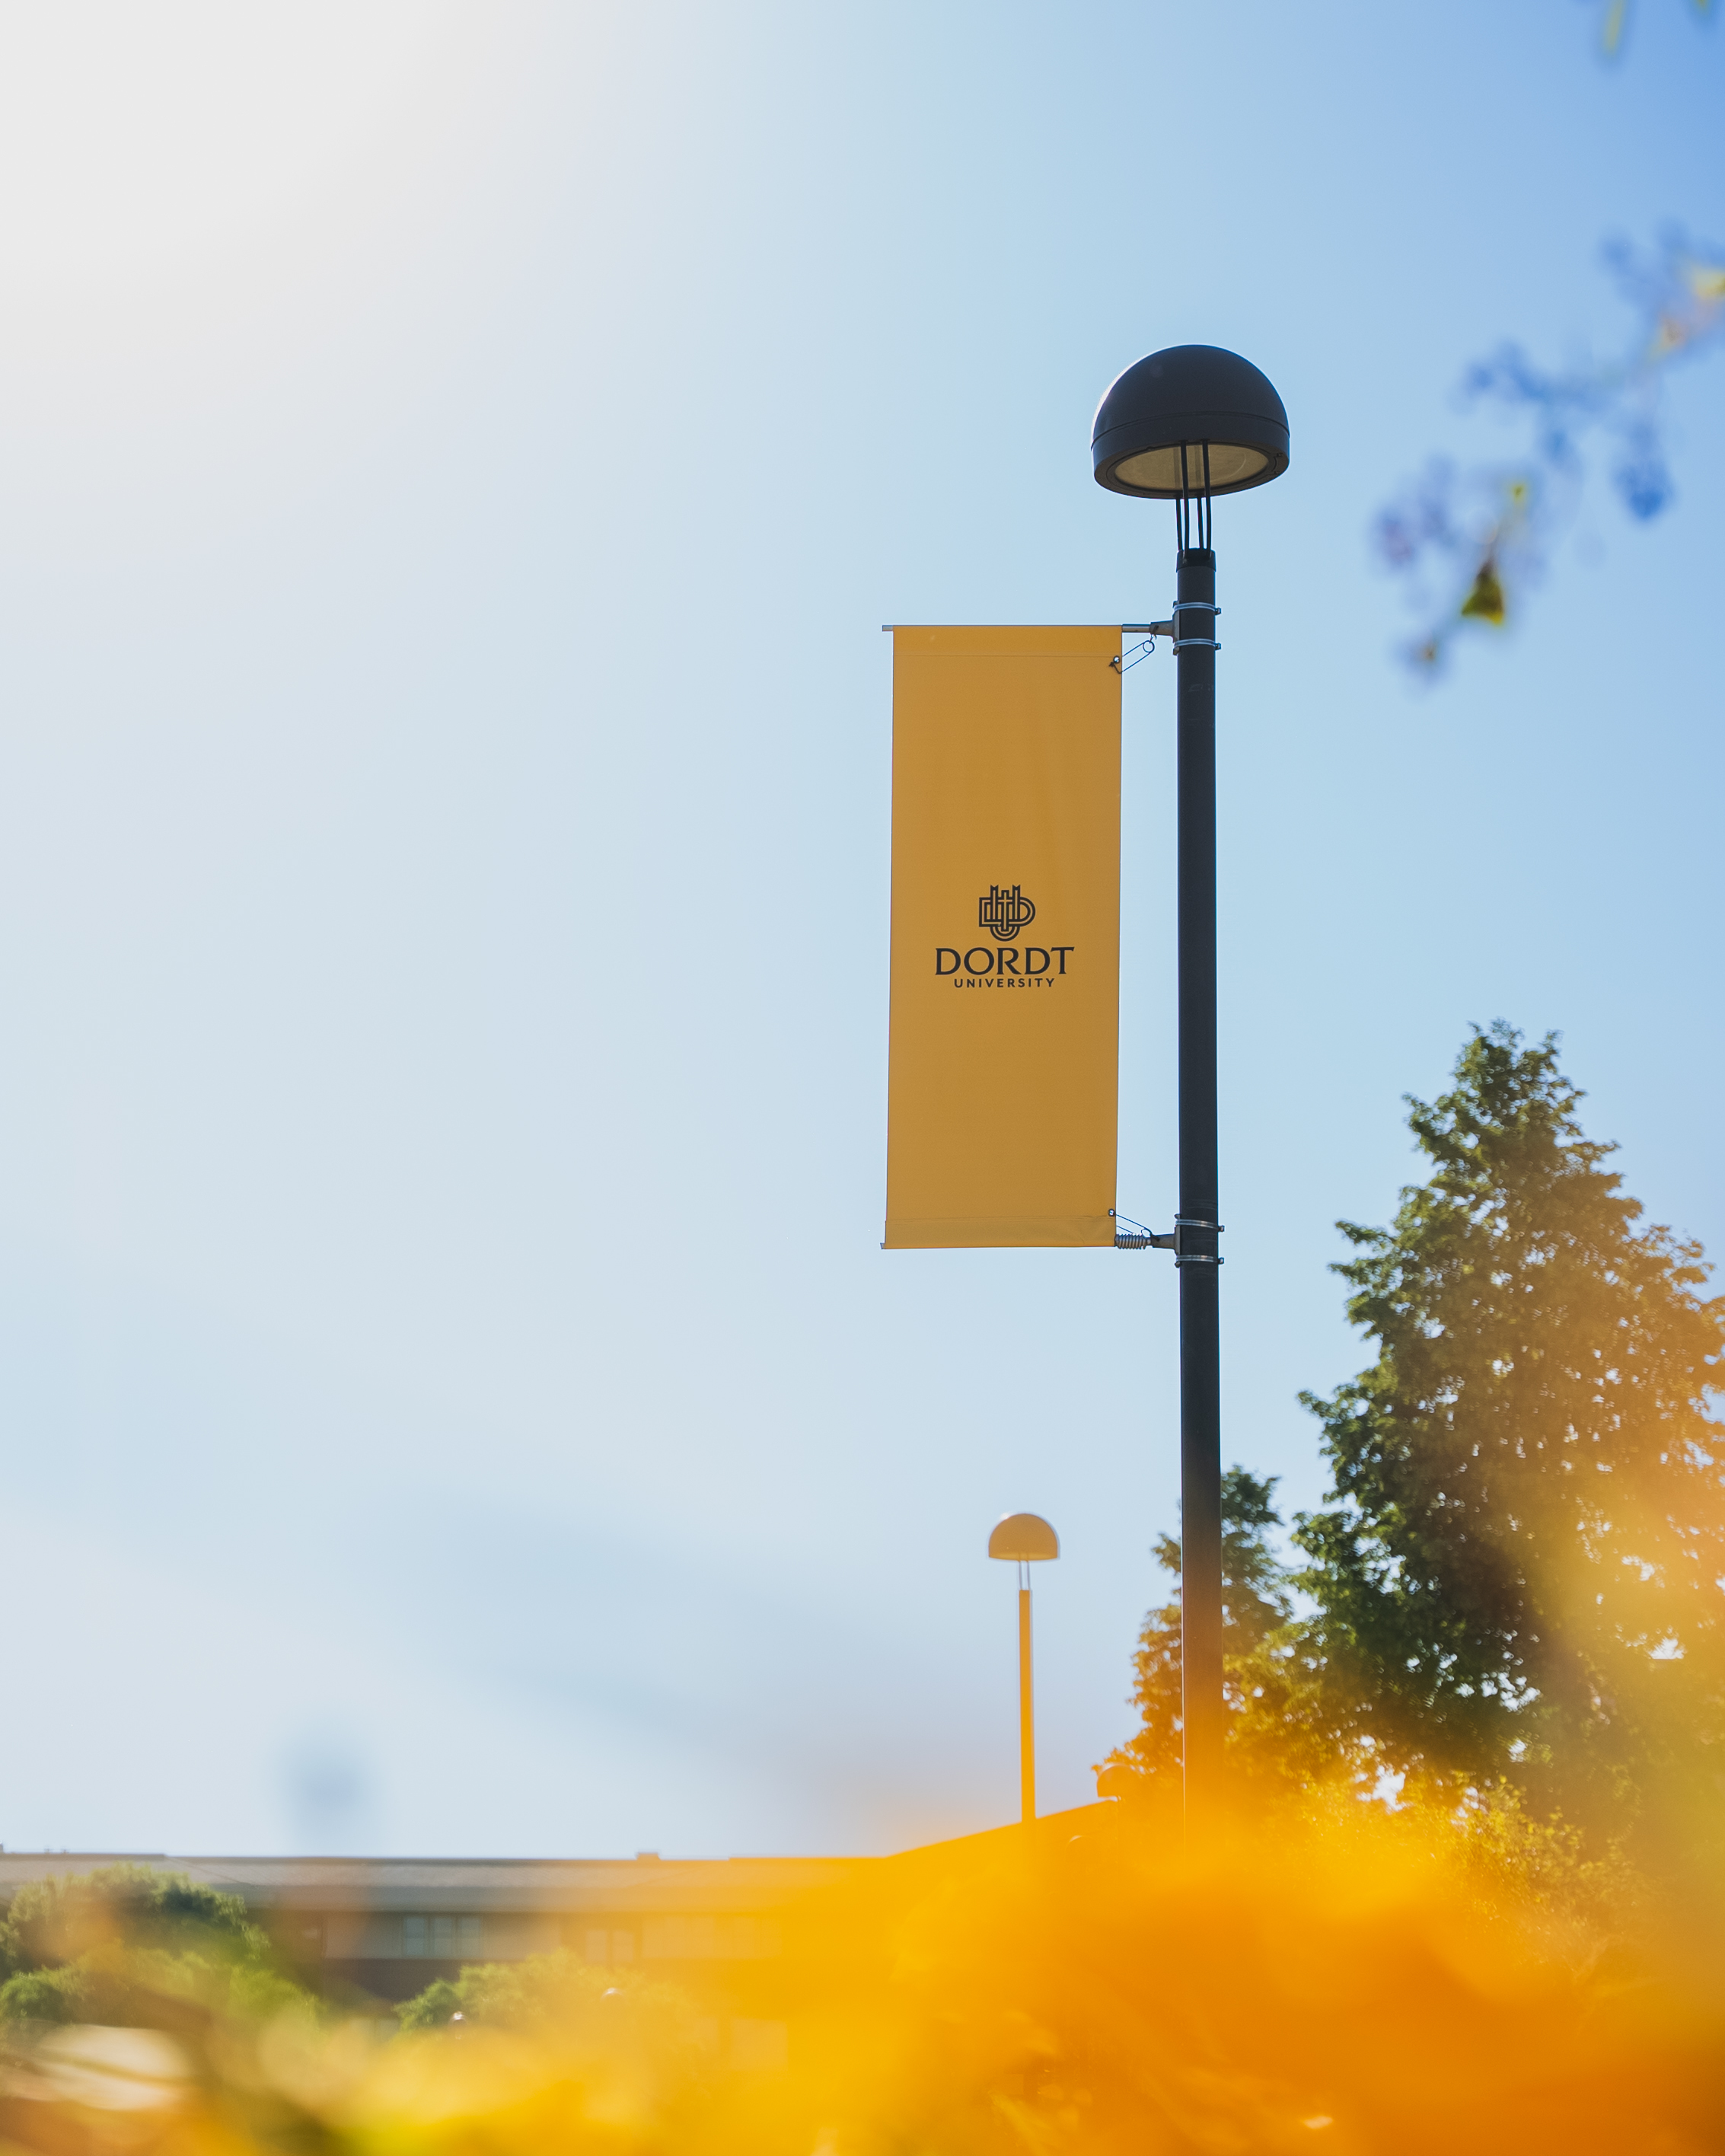 A picture of yellow flowers with a Dordt banner in the background